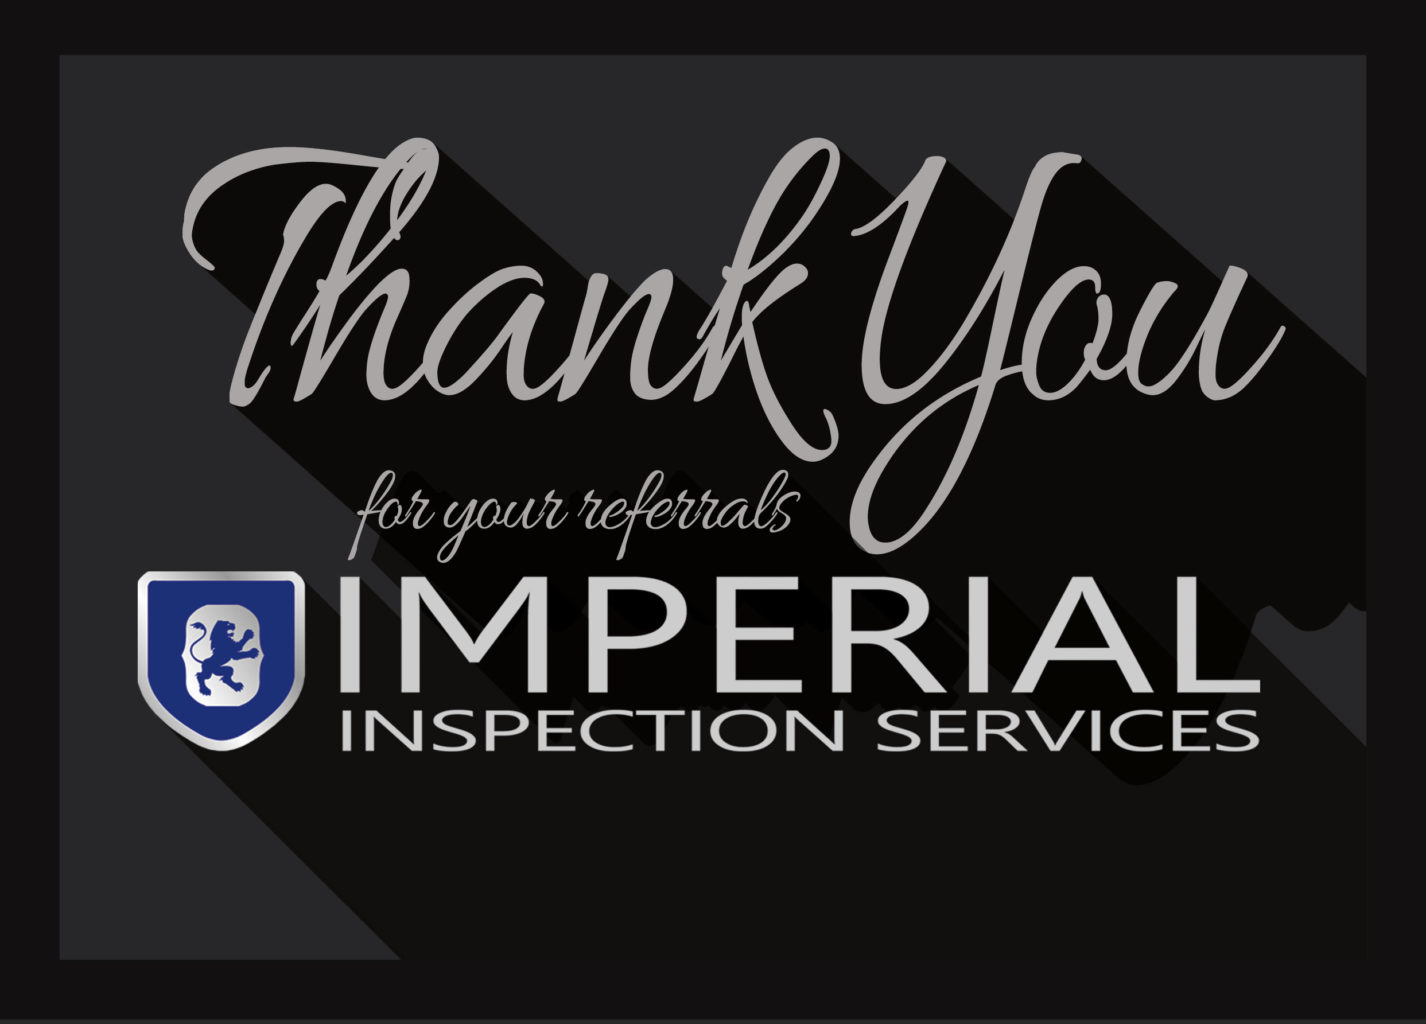 Imperial Inspection Thank You card